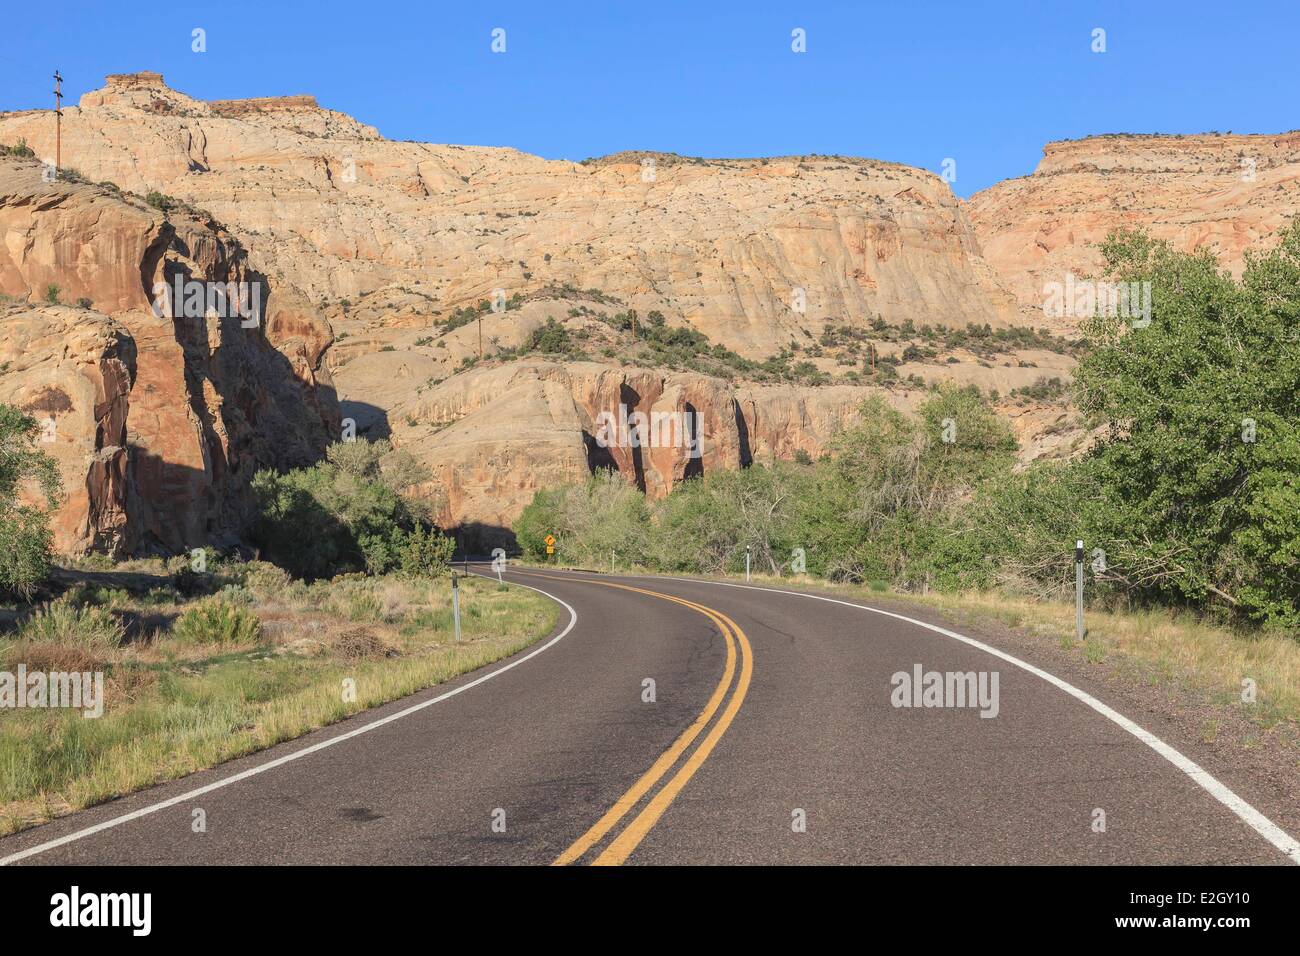 United States Utah Colorado Plateau Capitol Reef National Park colorful cliffs of Capitol Reef along Utah State Road 24 scenic byway Stock Photo